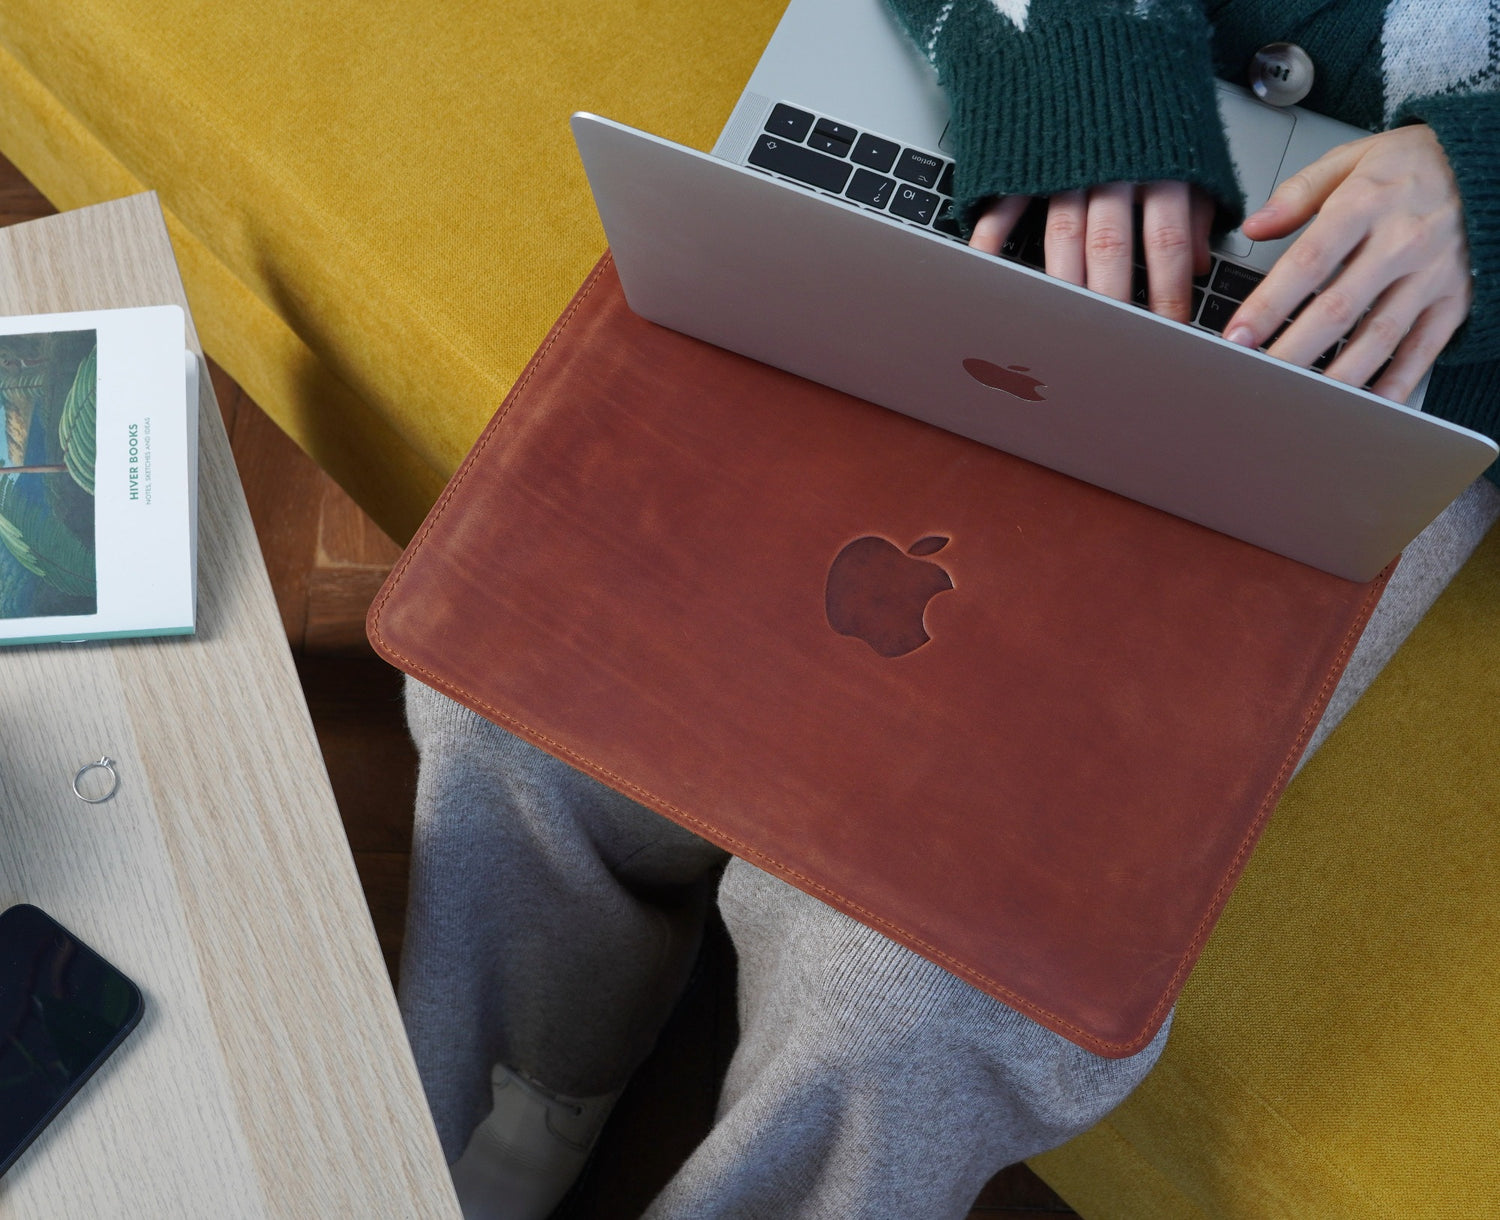 Leather Sleeve for Macbook Air 15 Inch